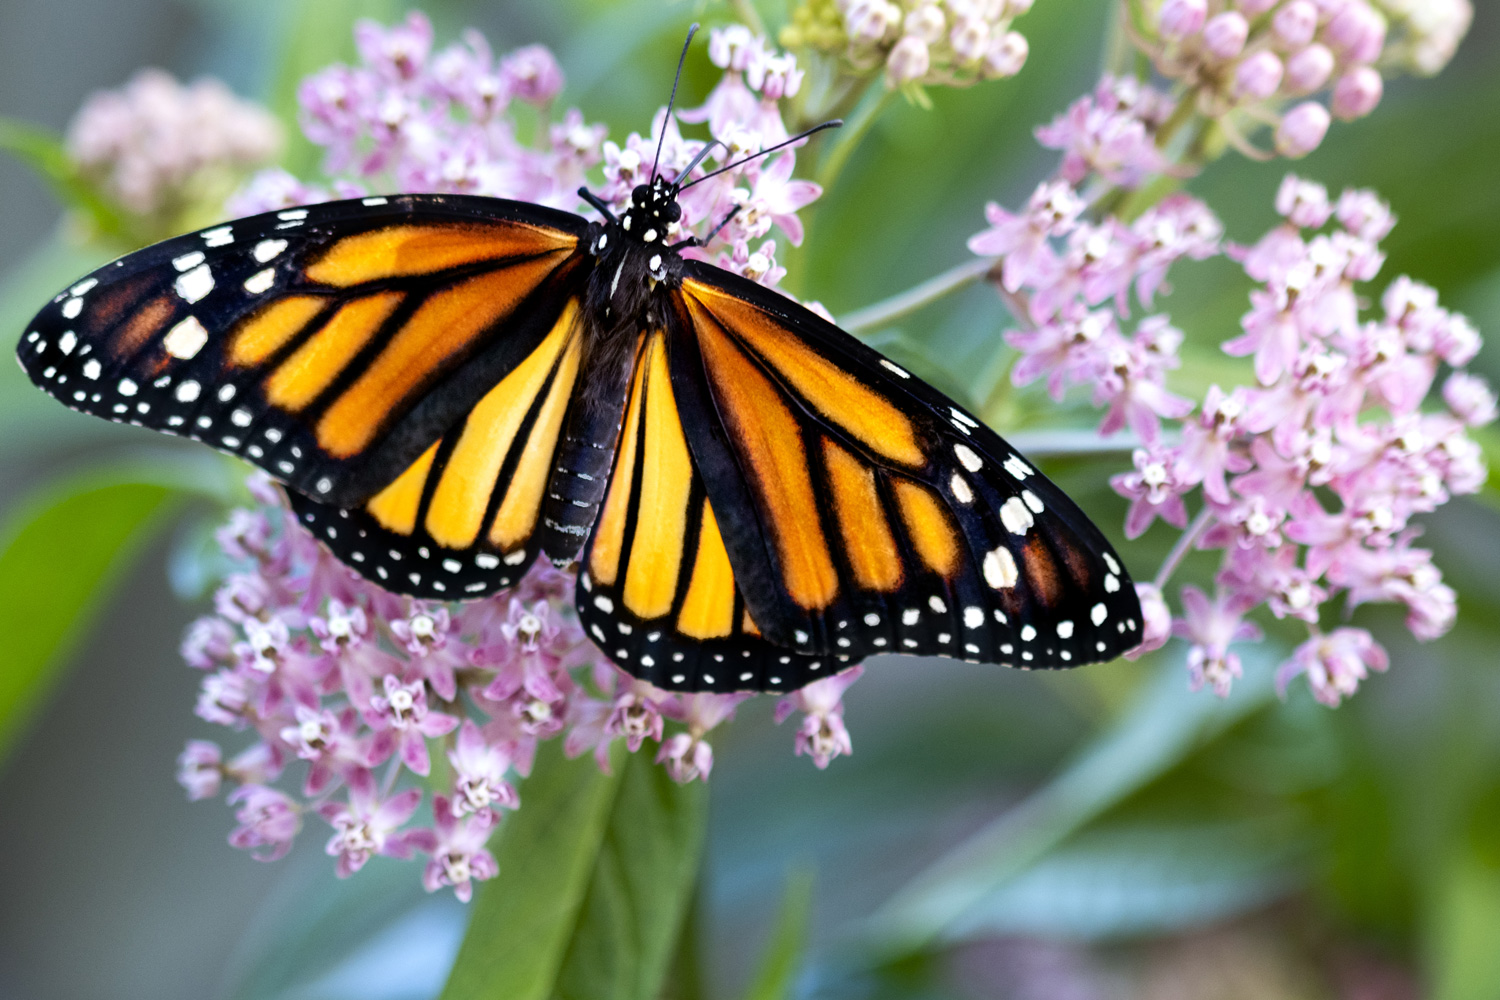 Close-up image of a monarch butterfly feeding on a milkweed plant